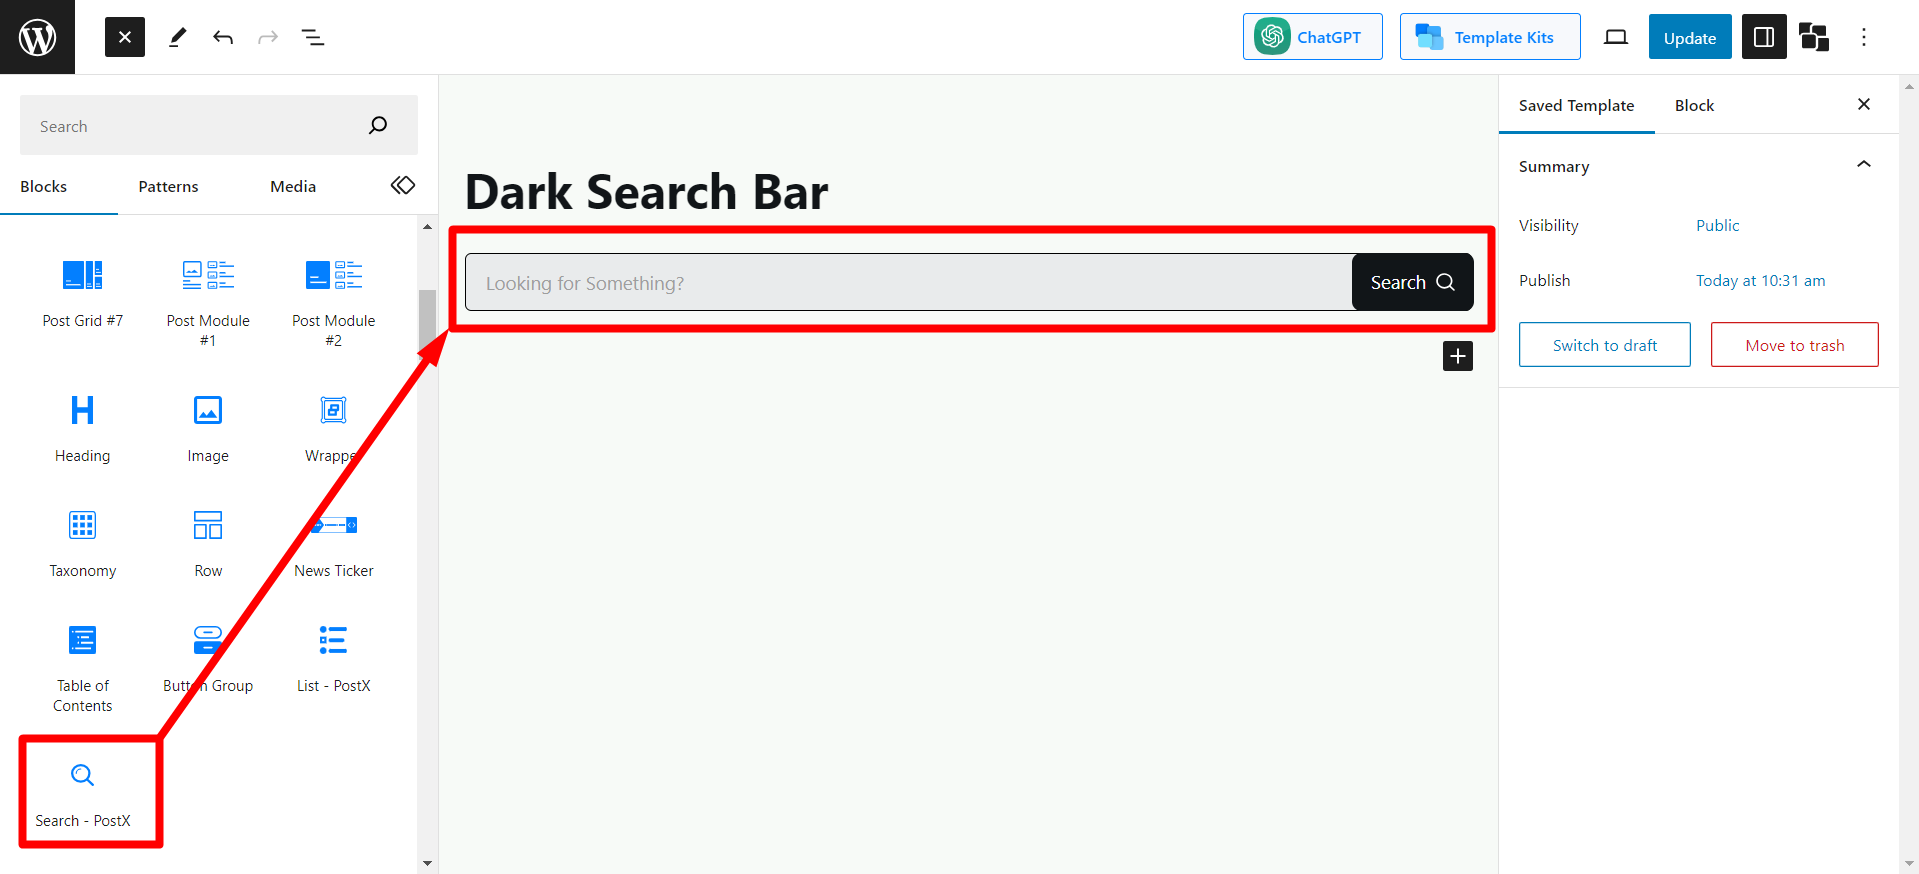 Add Search Block in Saved Template